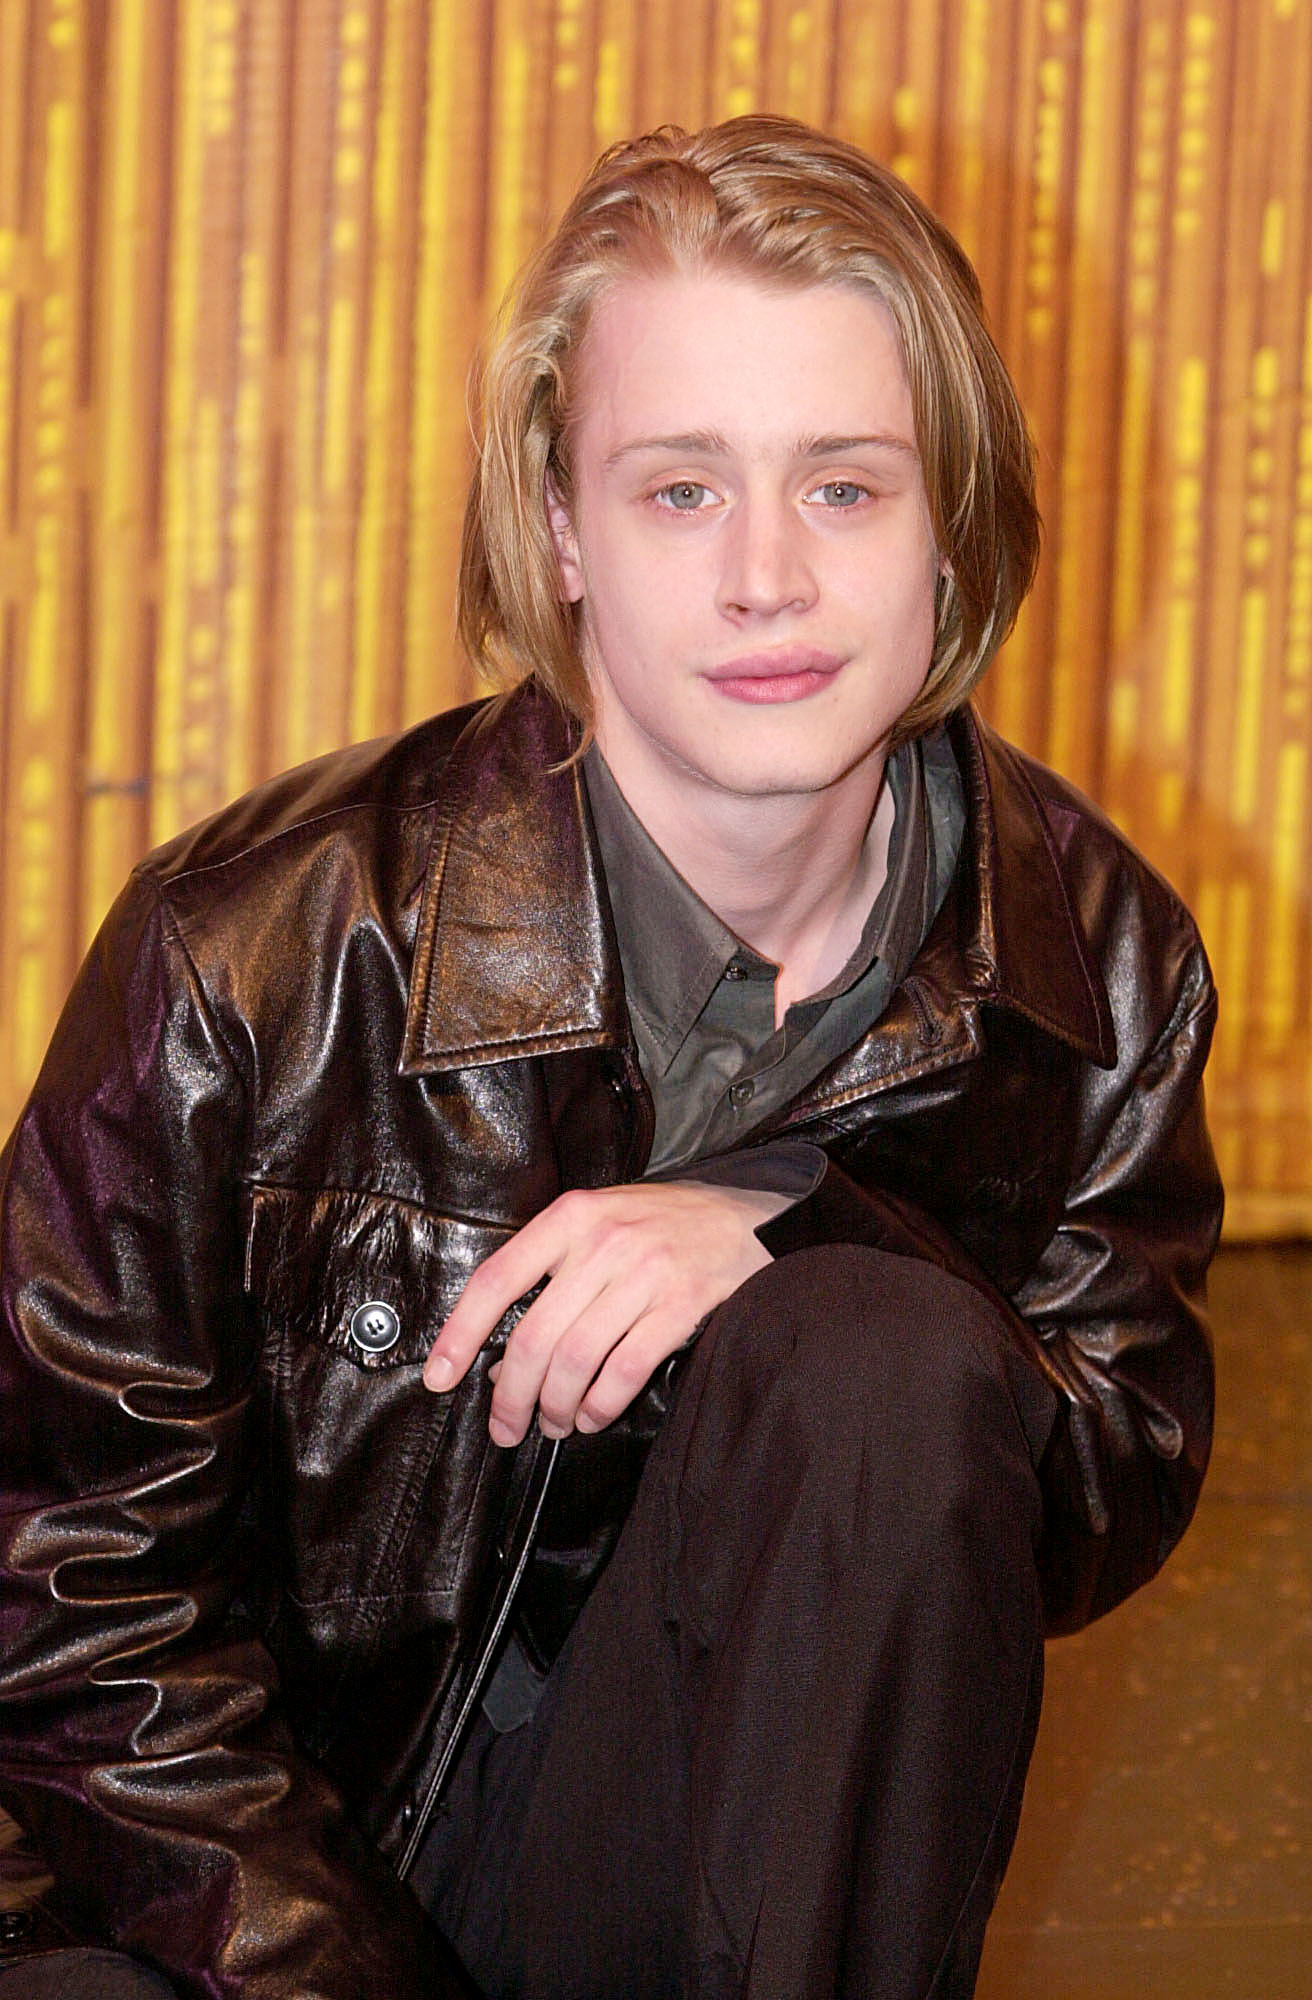 Macaulay Culkin at the Vaudeville Theatre in London, England in August 26, 2000 | Source: Getty Images